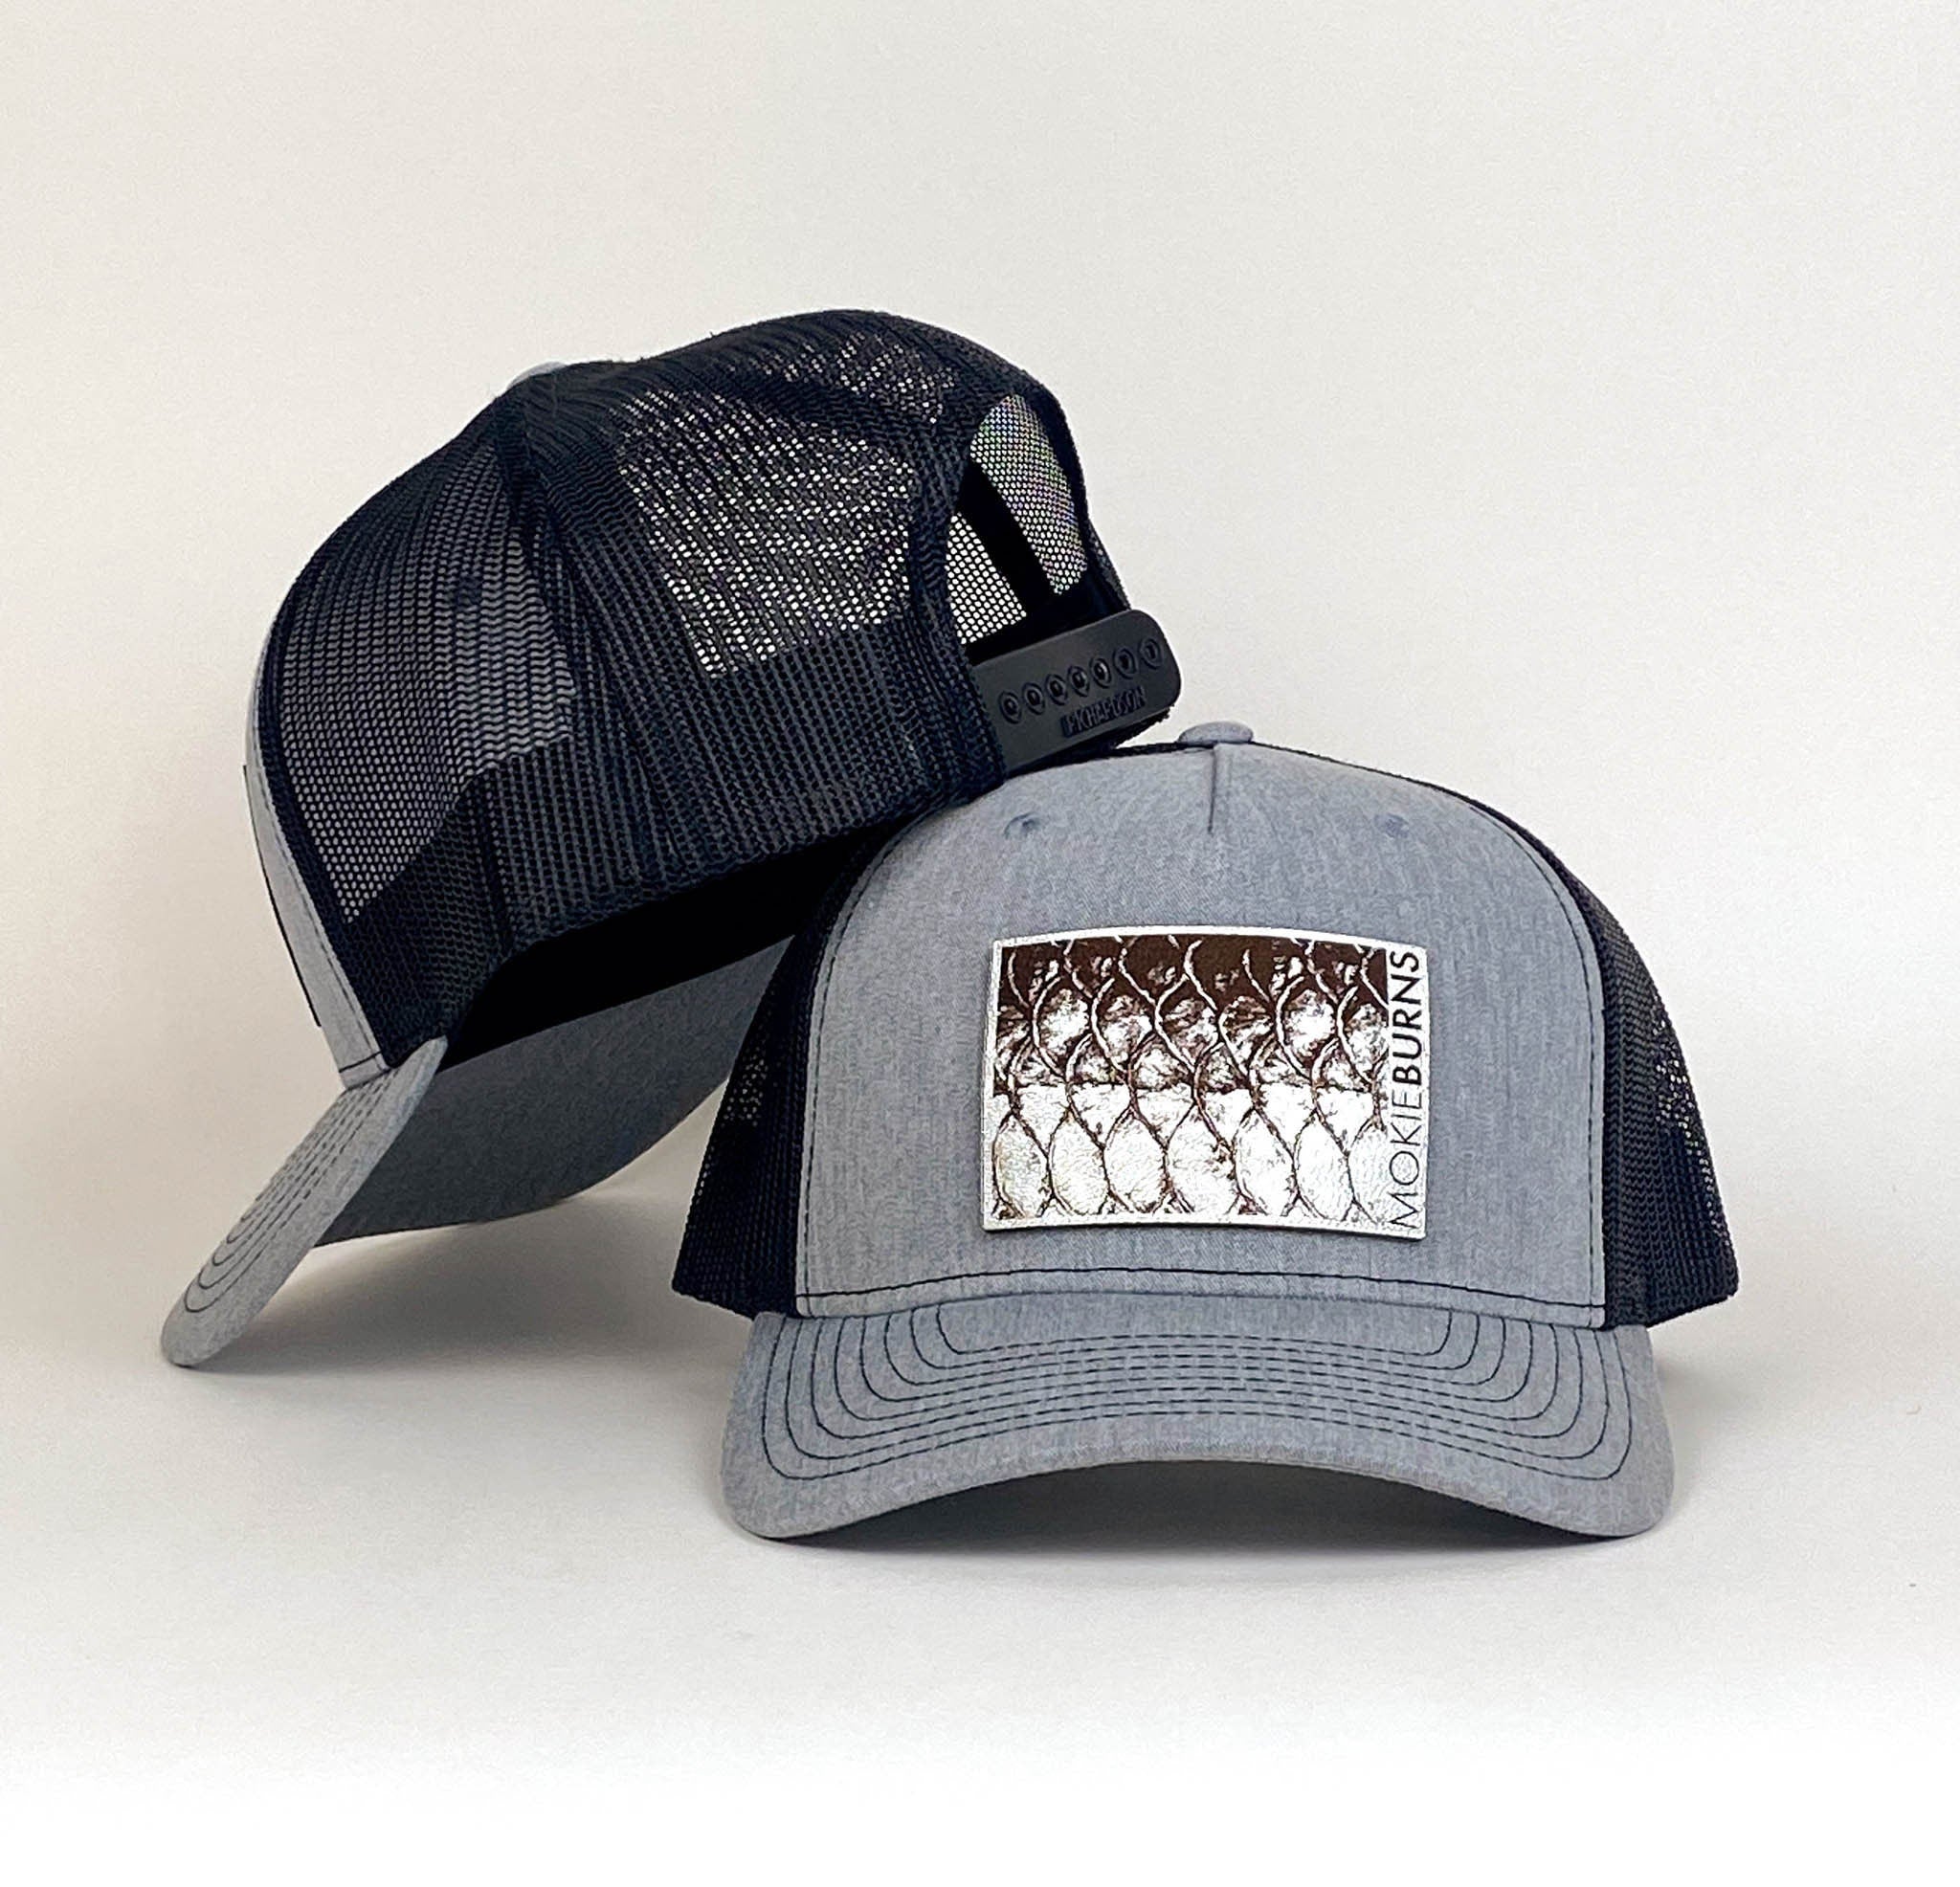 Tarpon Scales Trucker Hat - Mid Profile - Silver Patch *Multiple Colors* Heather Grey/Black